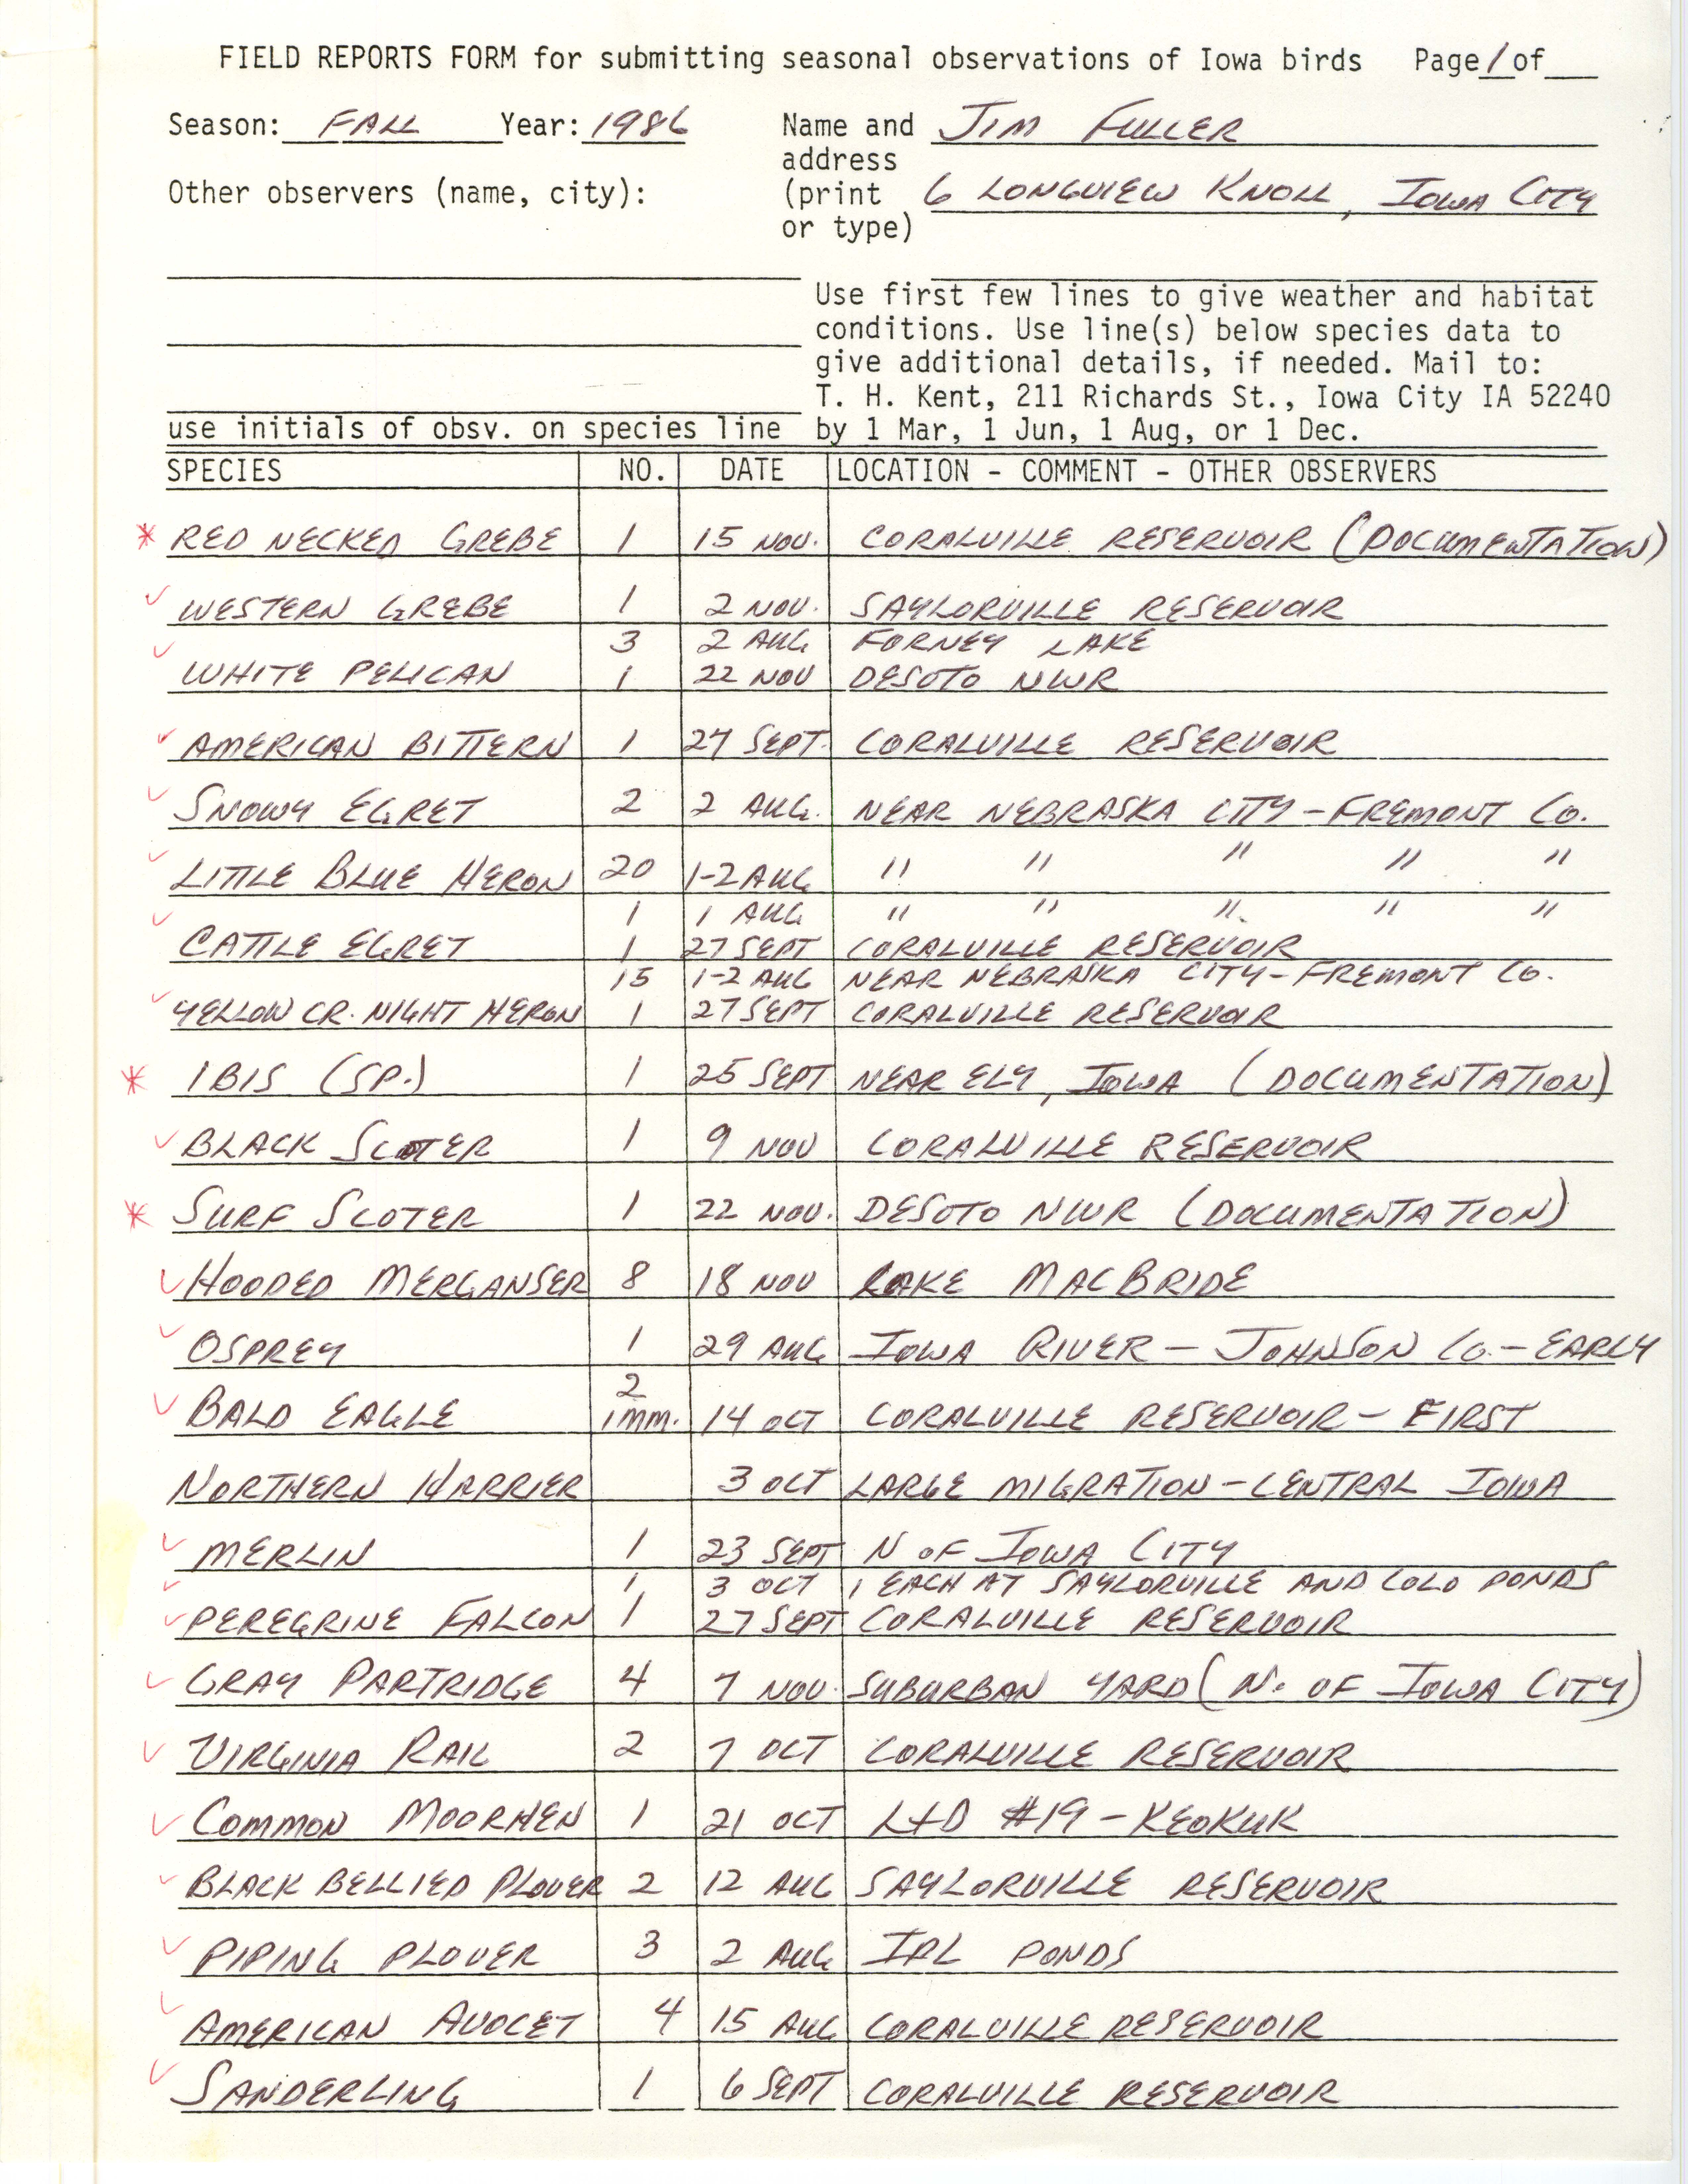 Field reports form, contributed by Jim L. Fuller, fall 1986